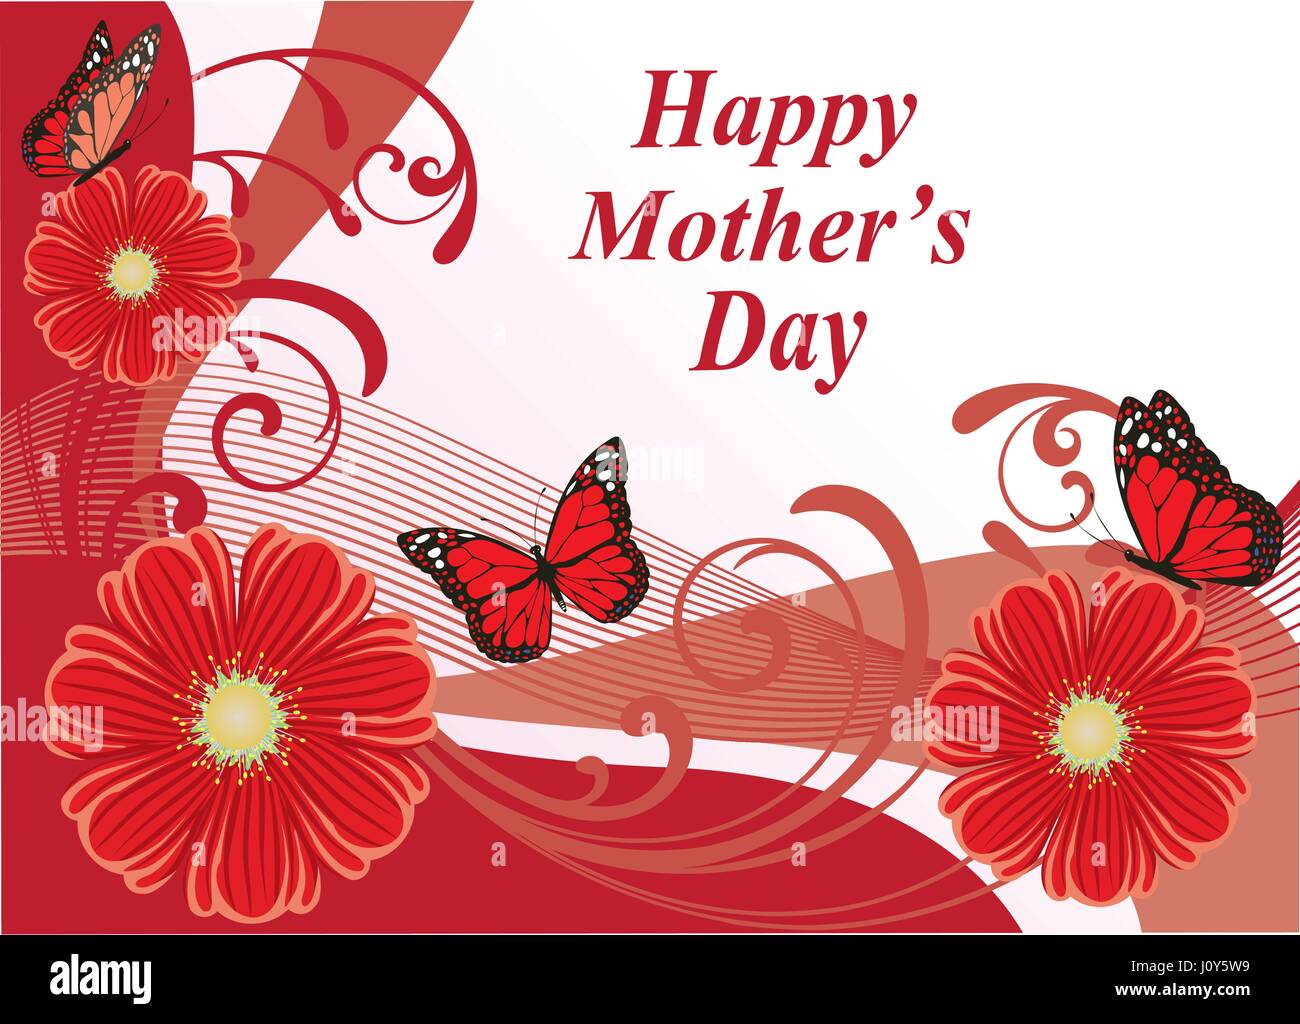 Download vector illustration of mother's day card with butterflies ...